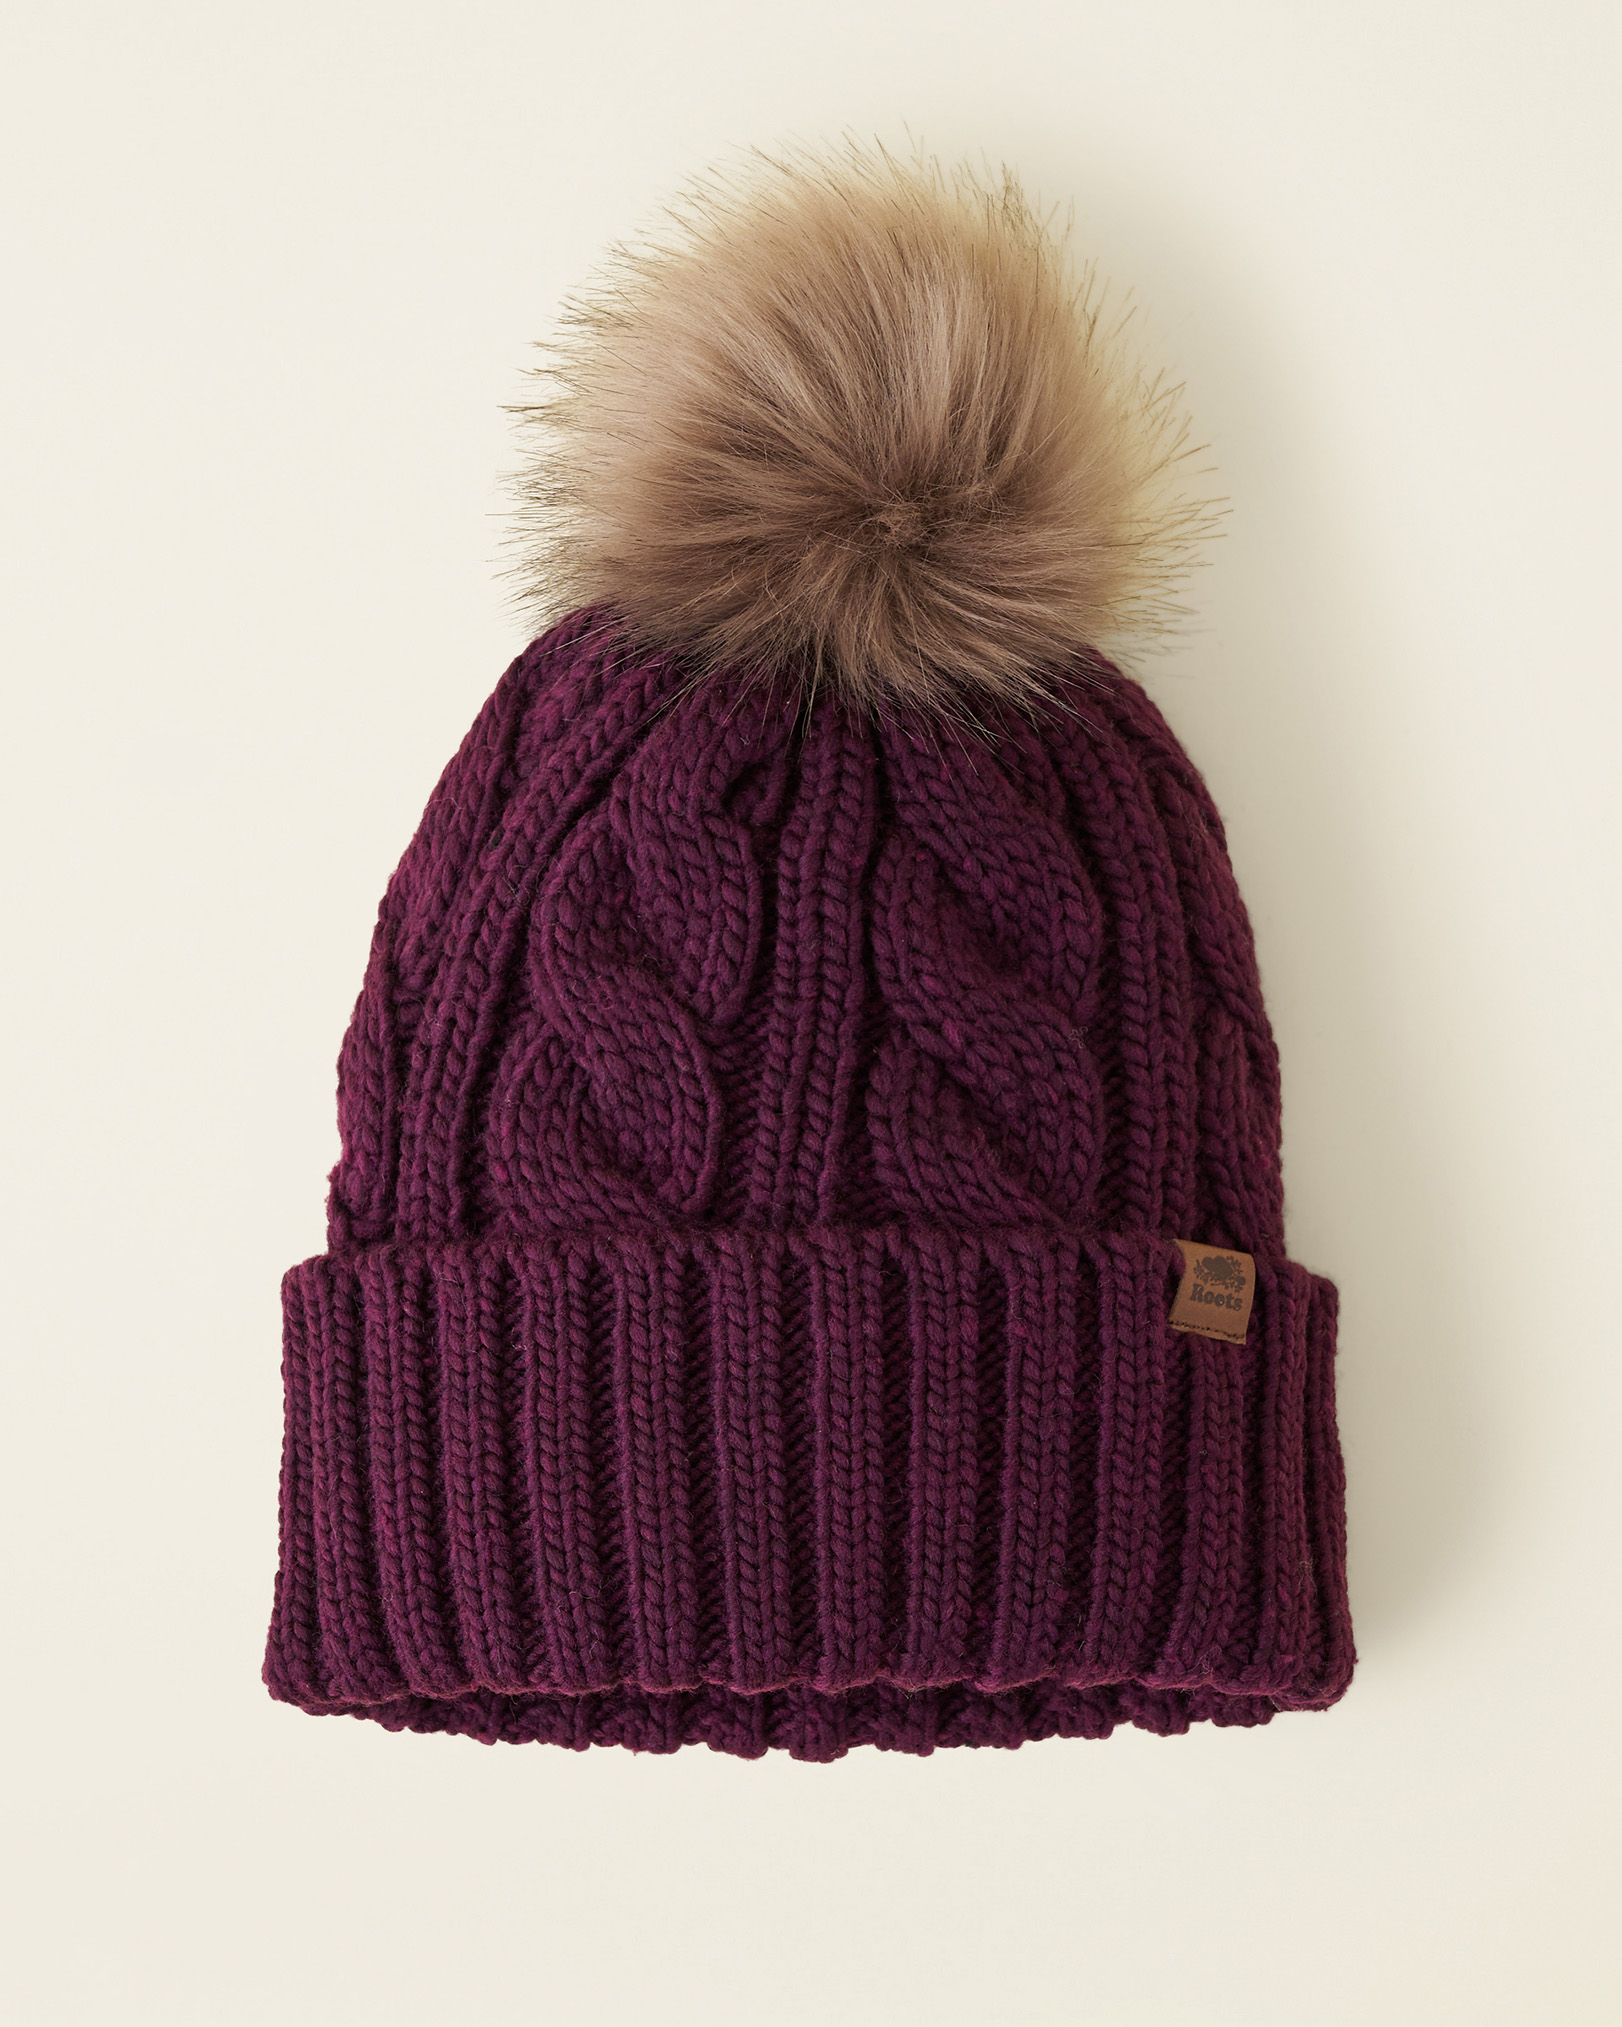 Roots Women's Olivia Cable Toque Hat in Astral Purple